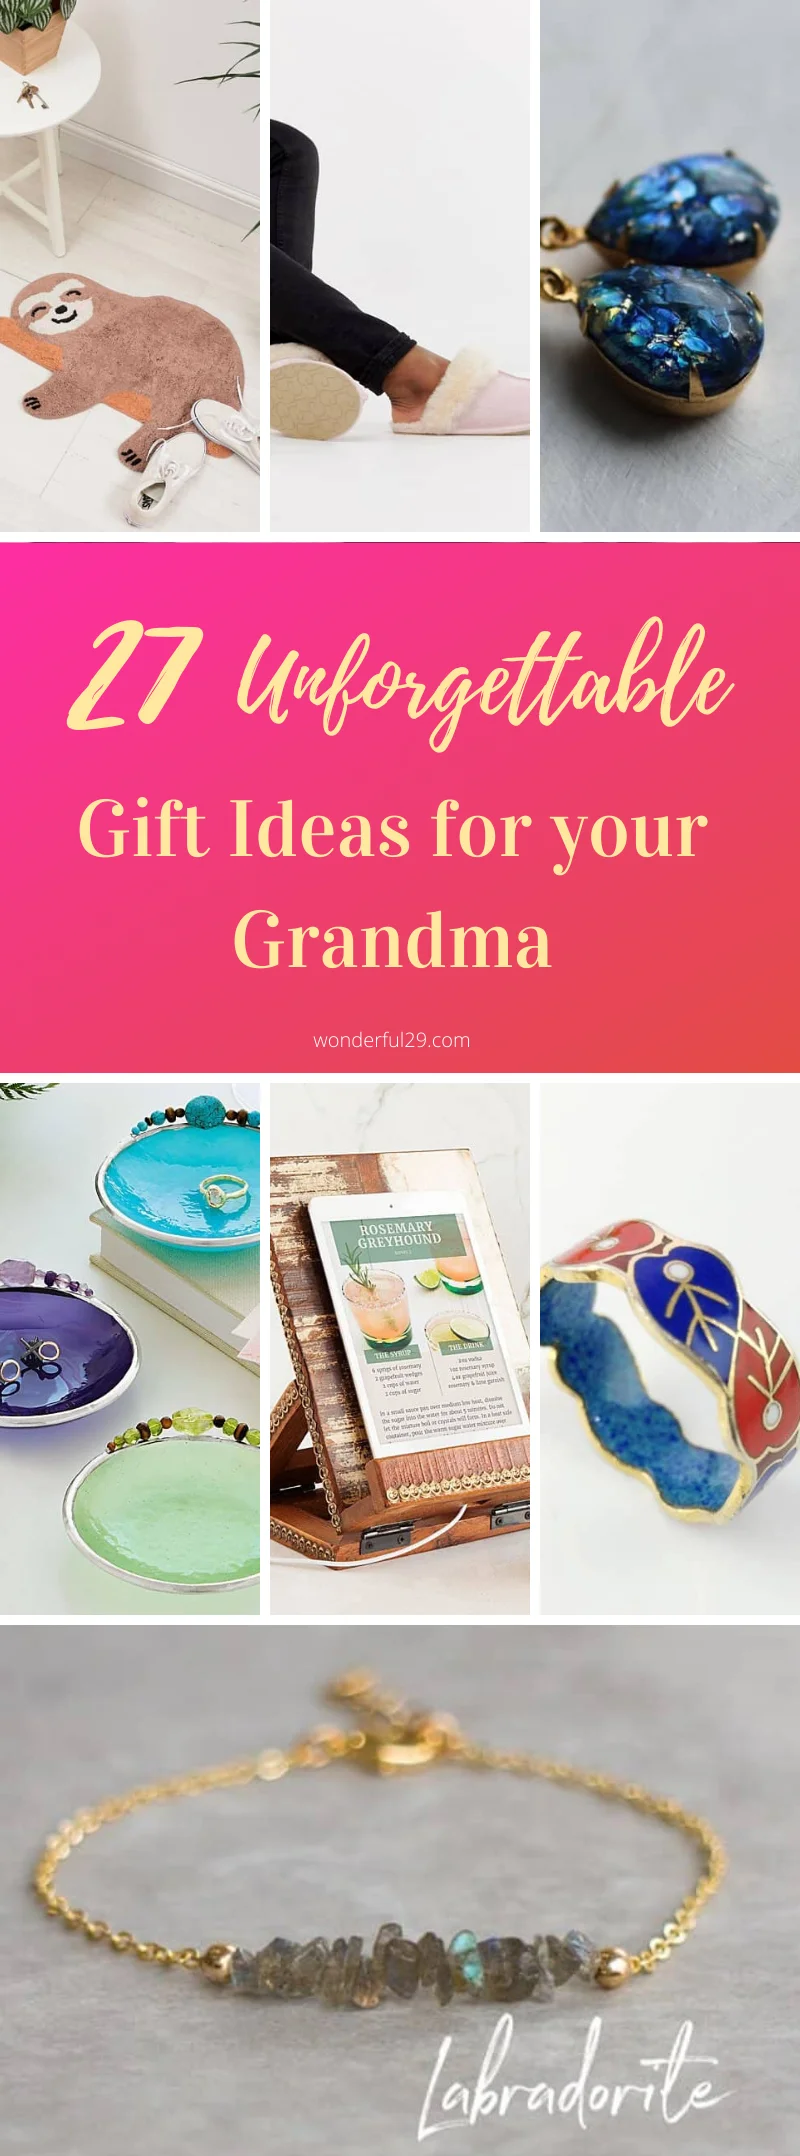 Homemade Gifts for Grandparents Made By Children - Artsy Momma